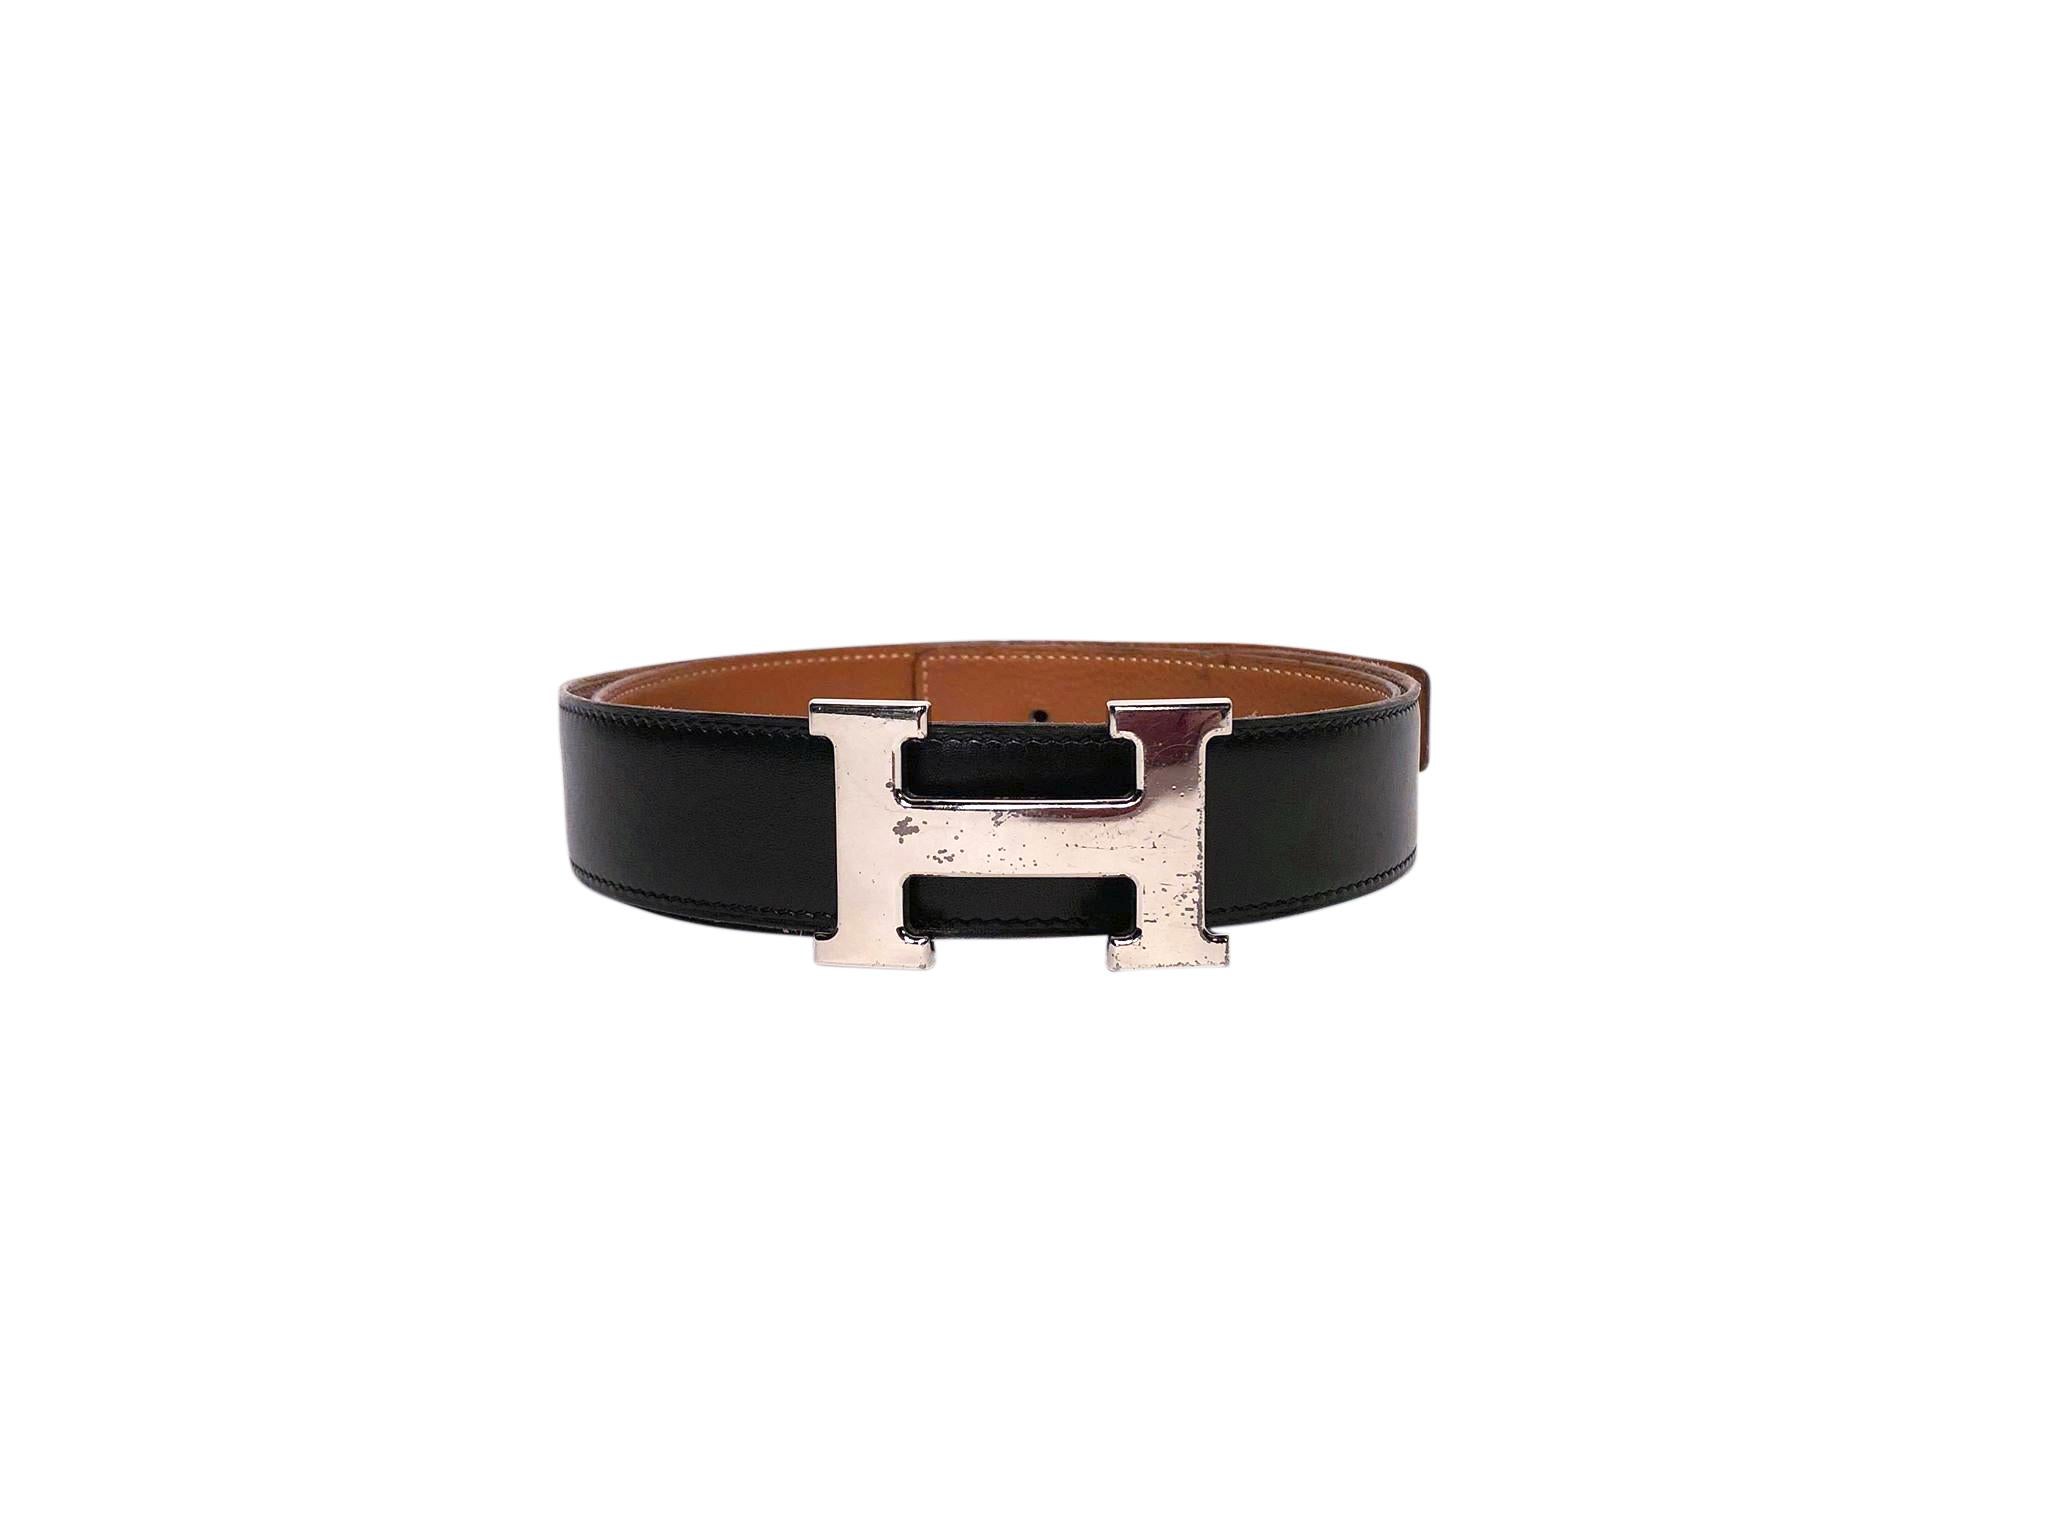 Pre-owned 2008 Hermès Constance silver toned belt buckle and reversable tan and black strap.
90